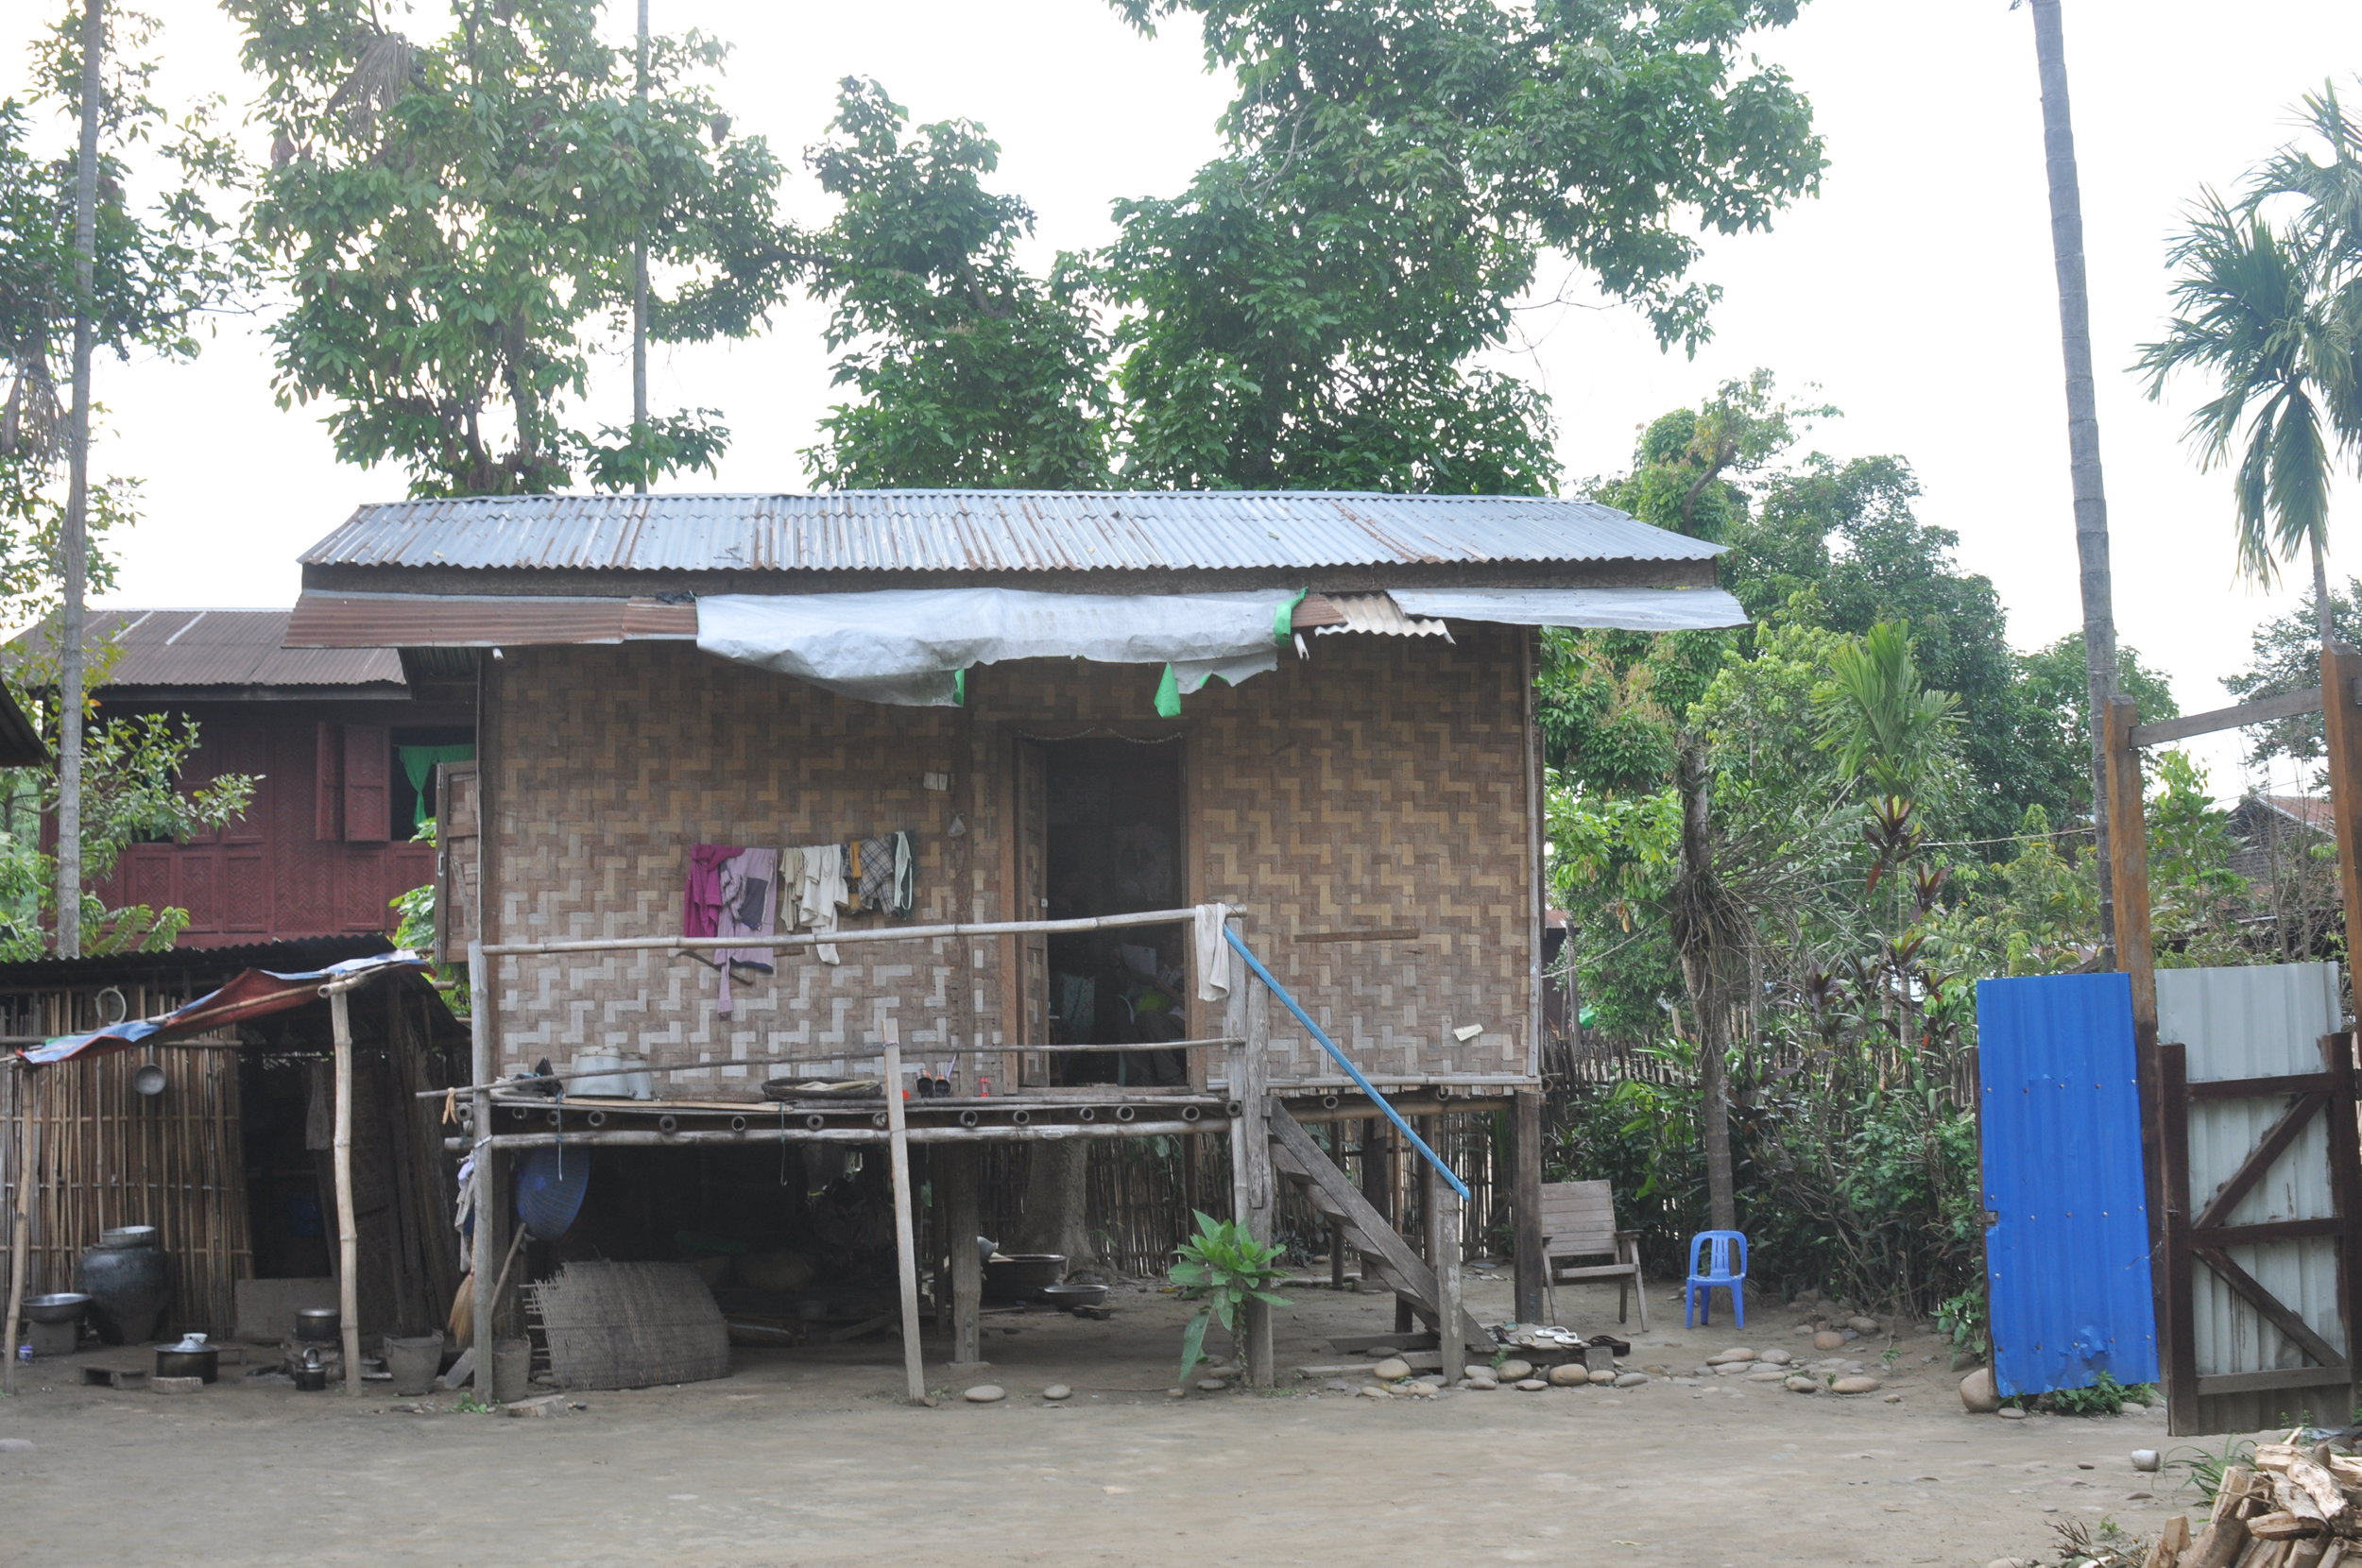  The home of one of the HIV+ children in Kachin State in Myanmar for whom we are providing a tutor. 